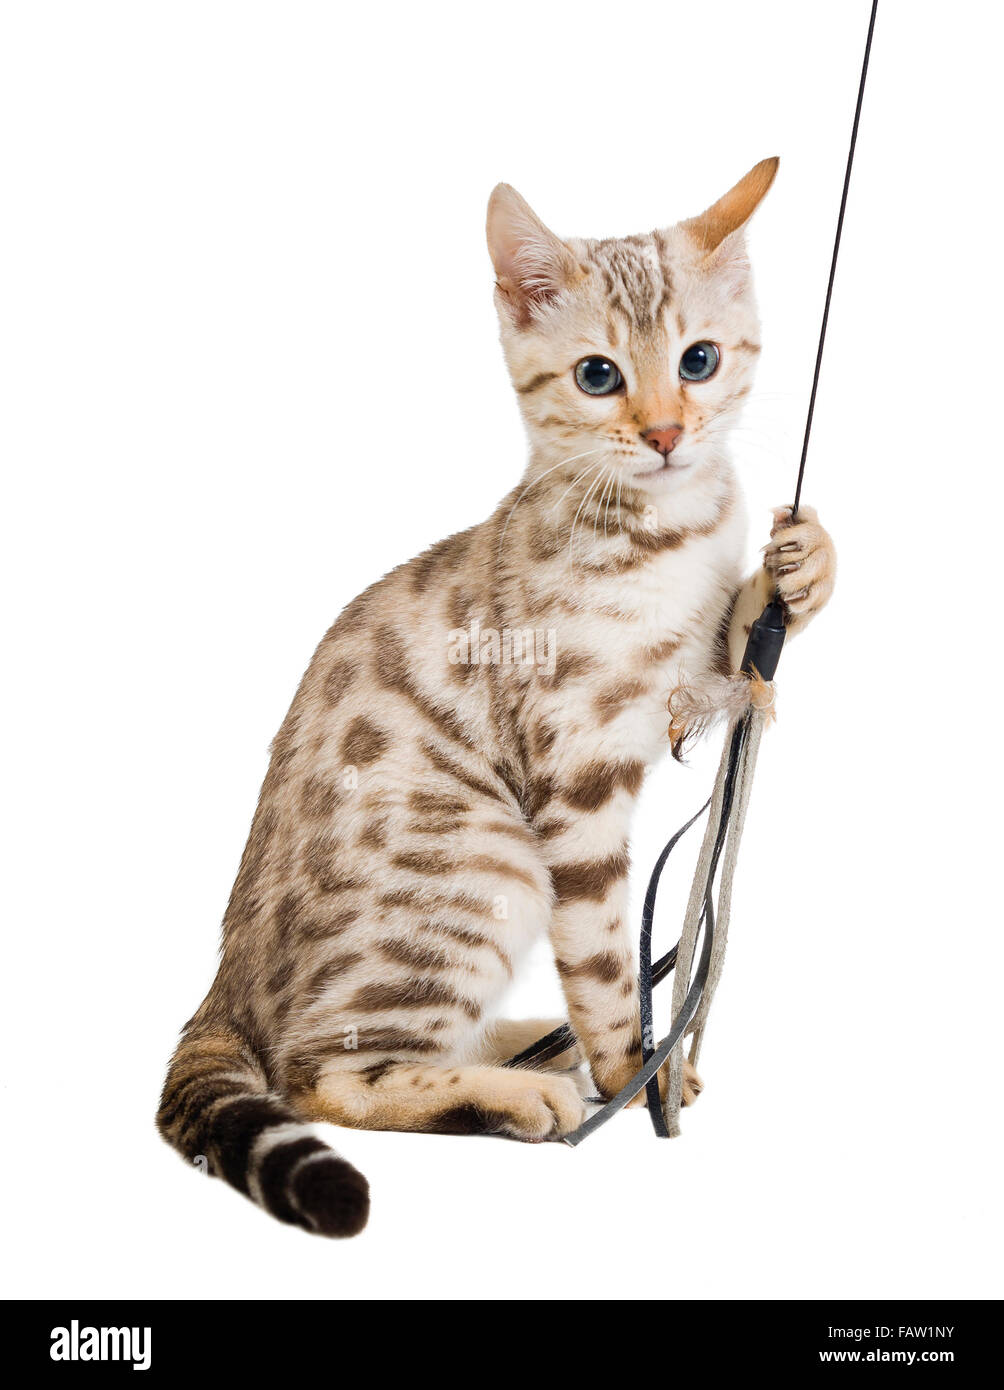 Cute white Bengal cat kitten pulling a string isolated on white background  Model Release: Yes.  Property Release: No. Stock Photo